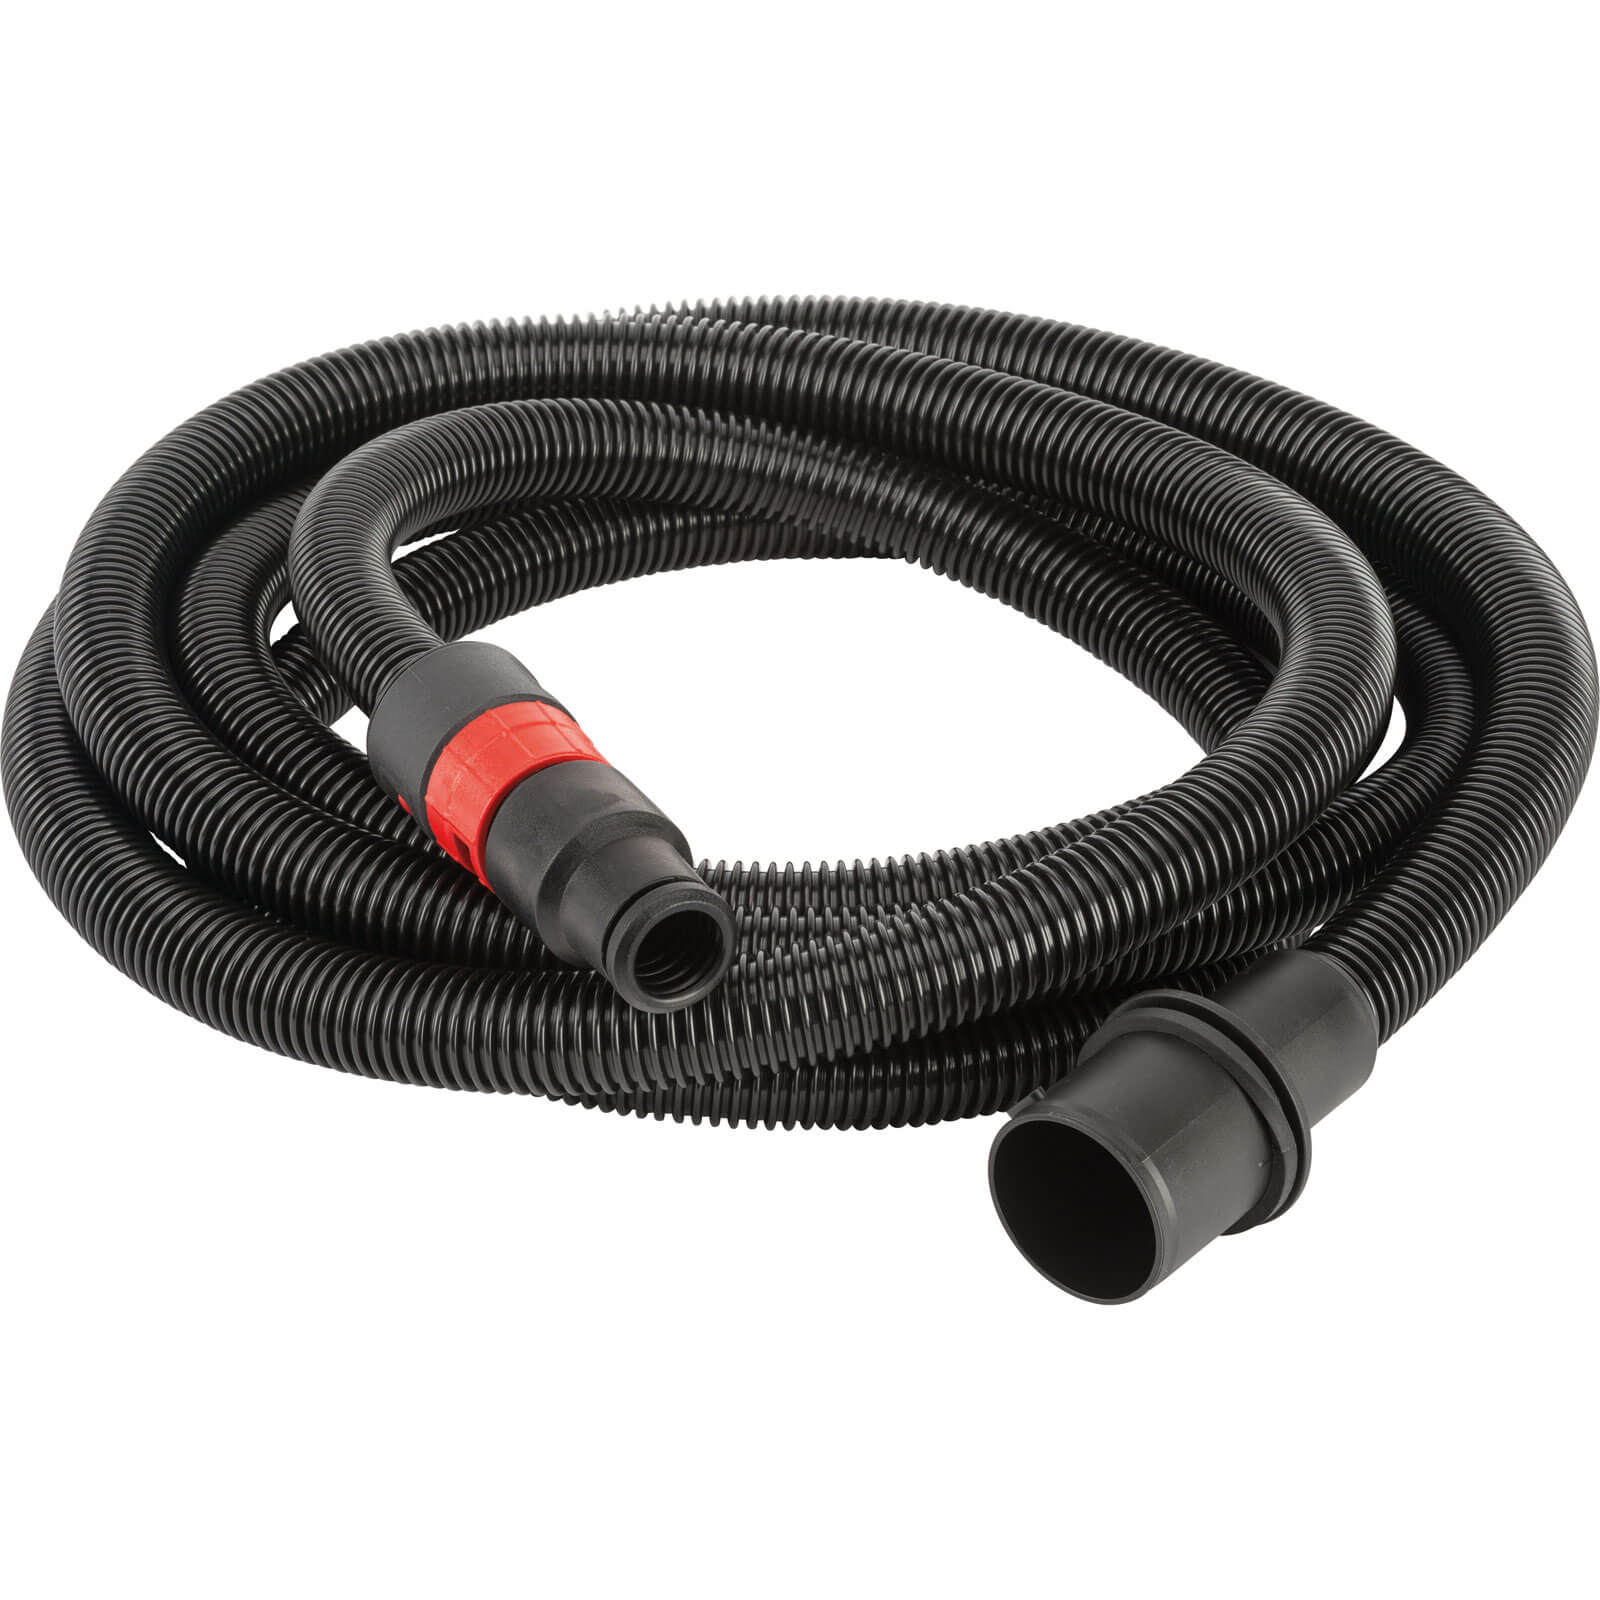 Image of Bosch Dust Extractor Hose For GAS Extractors 5m